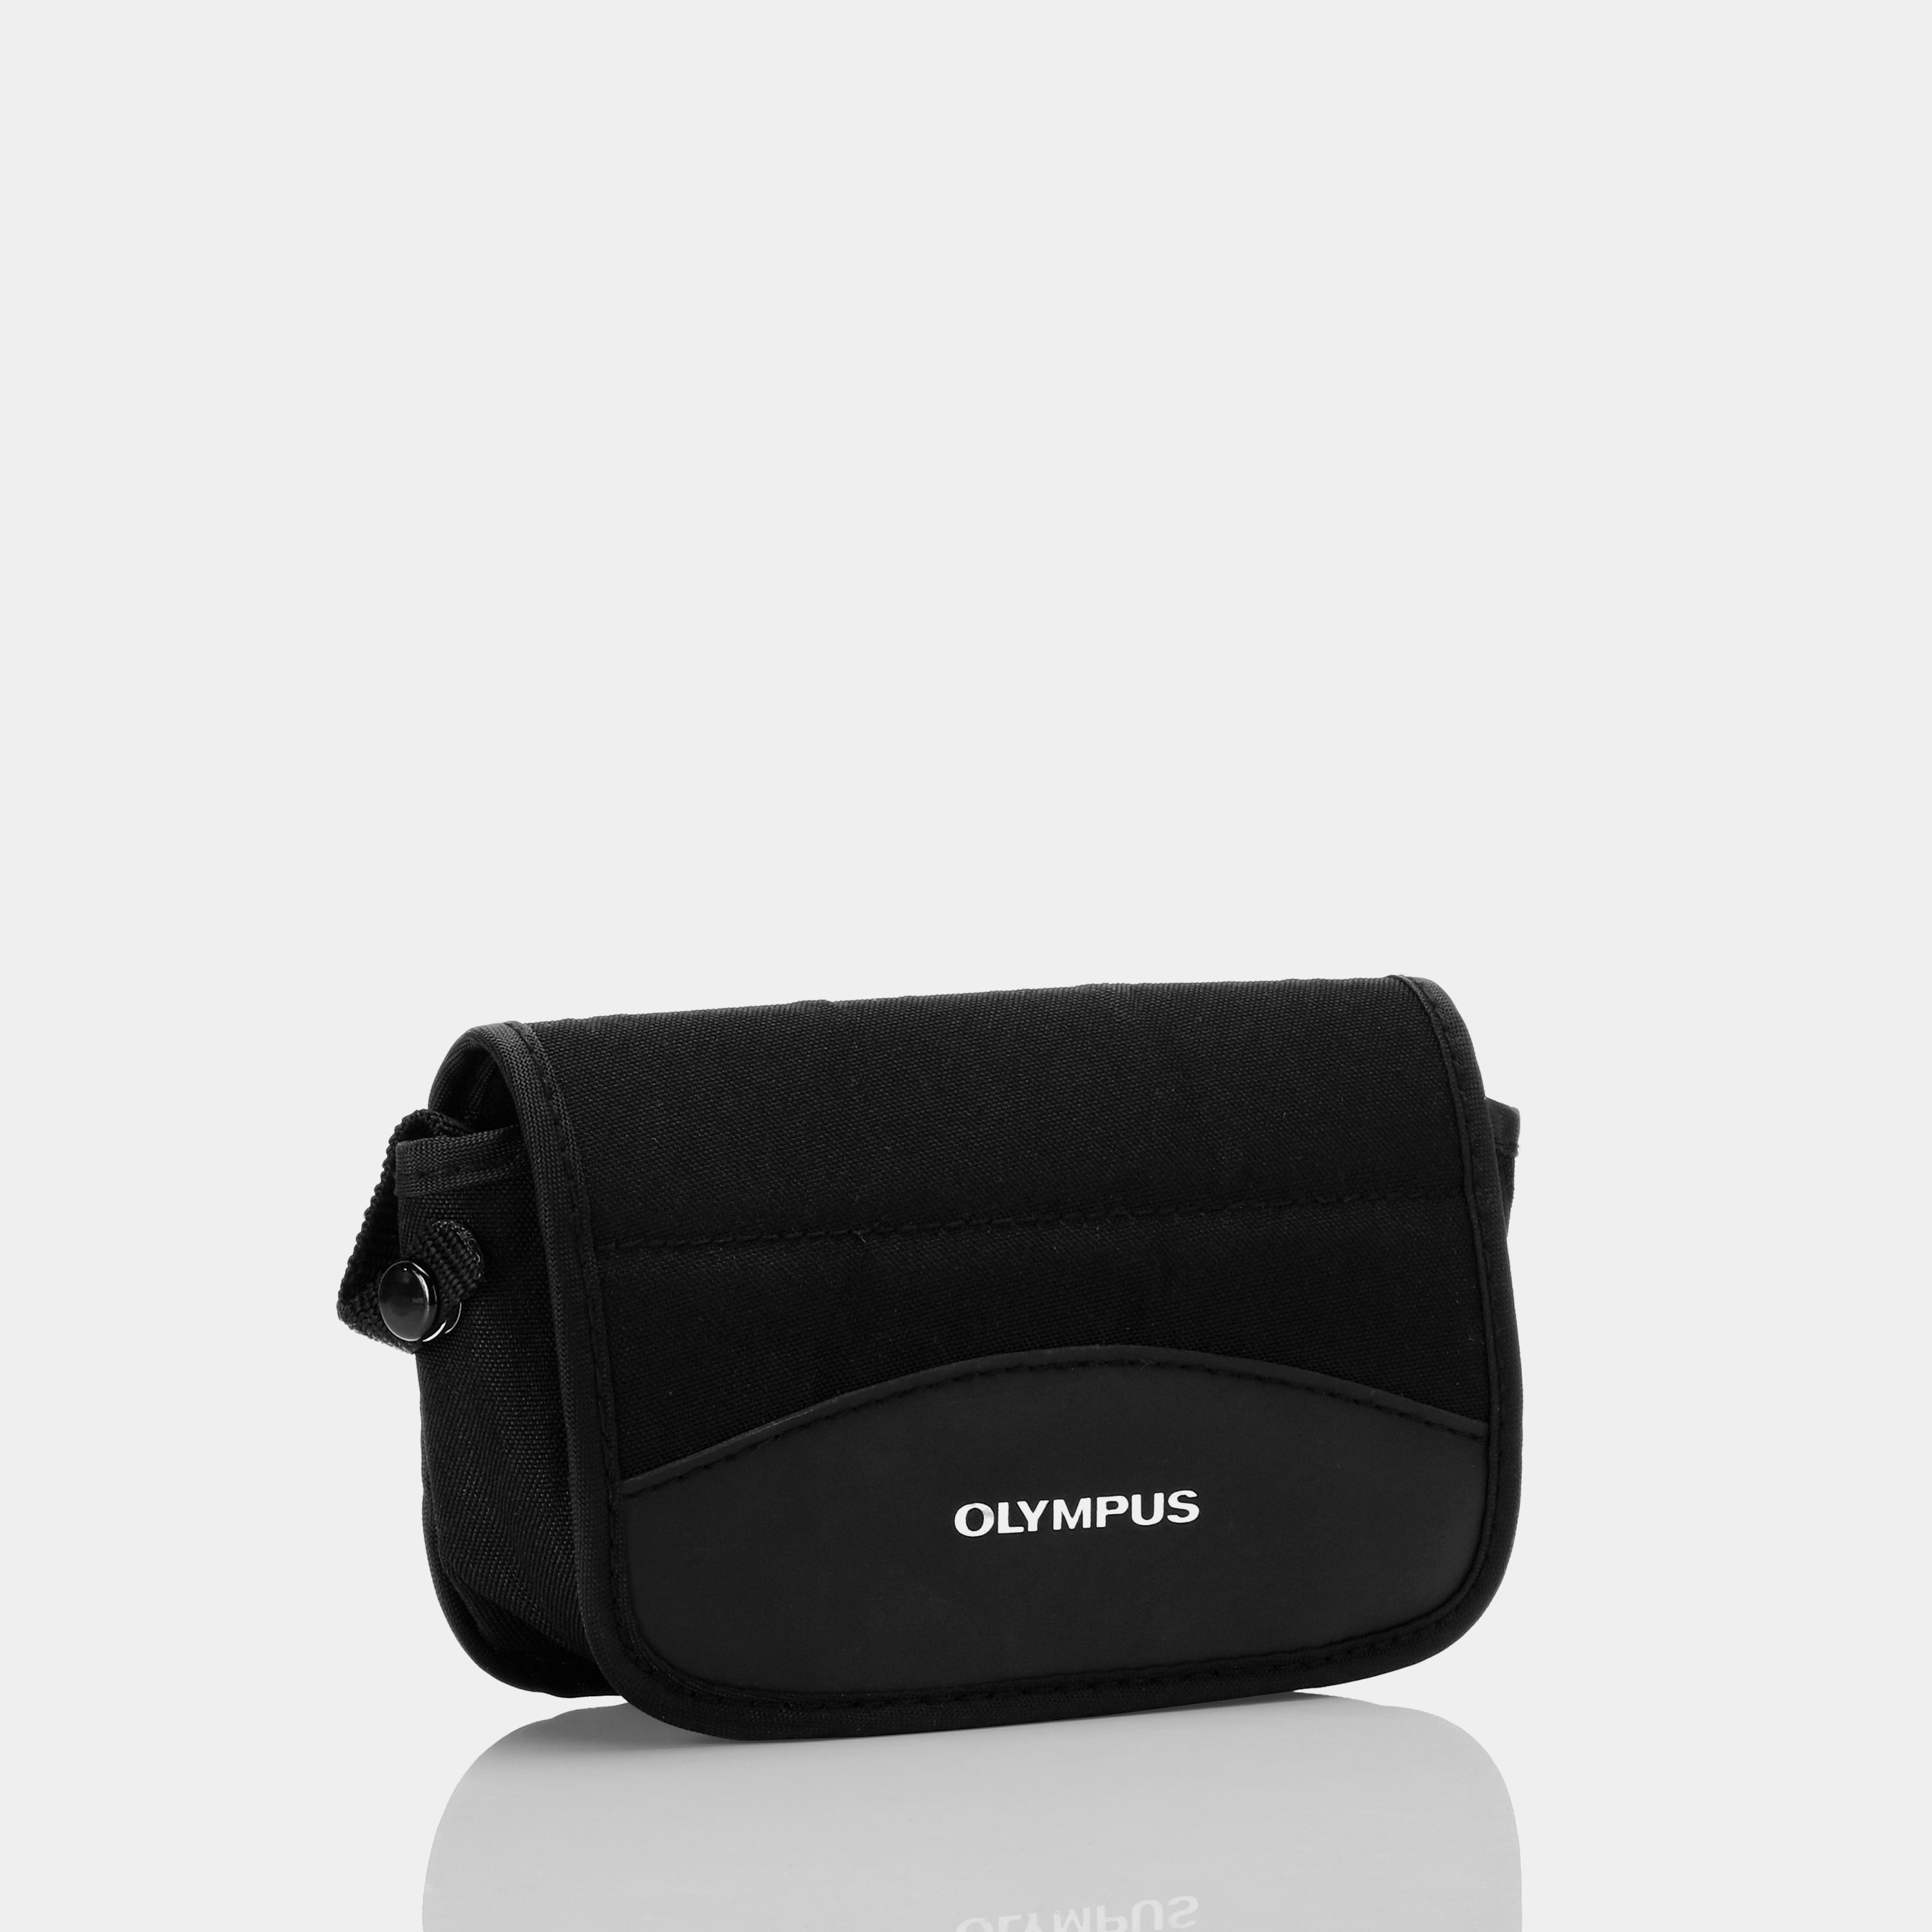 Olympus Black Point and Shoot Camera Case